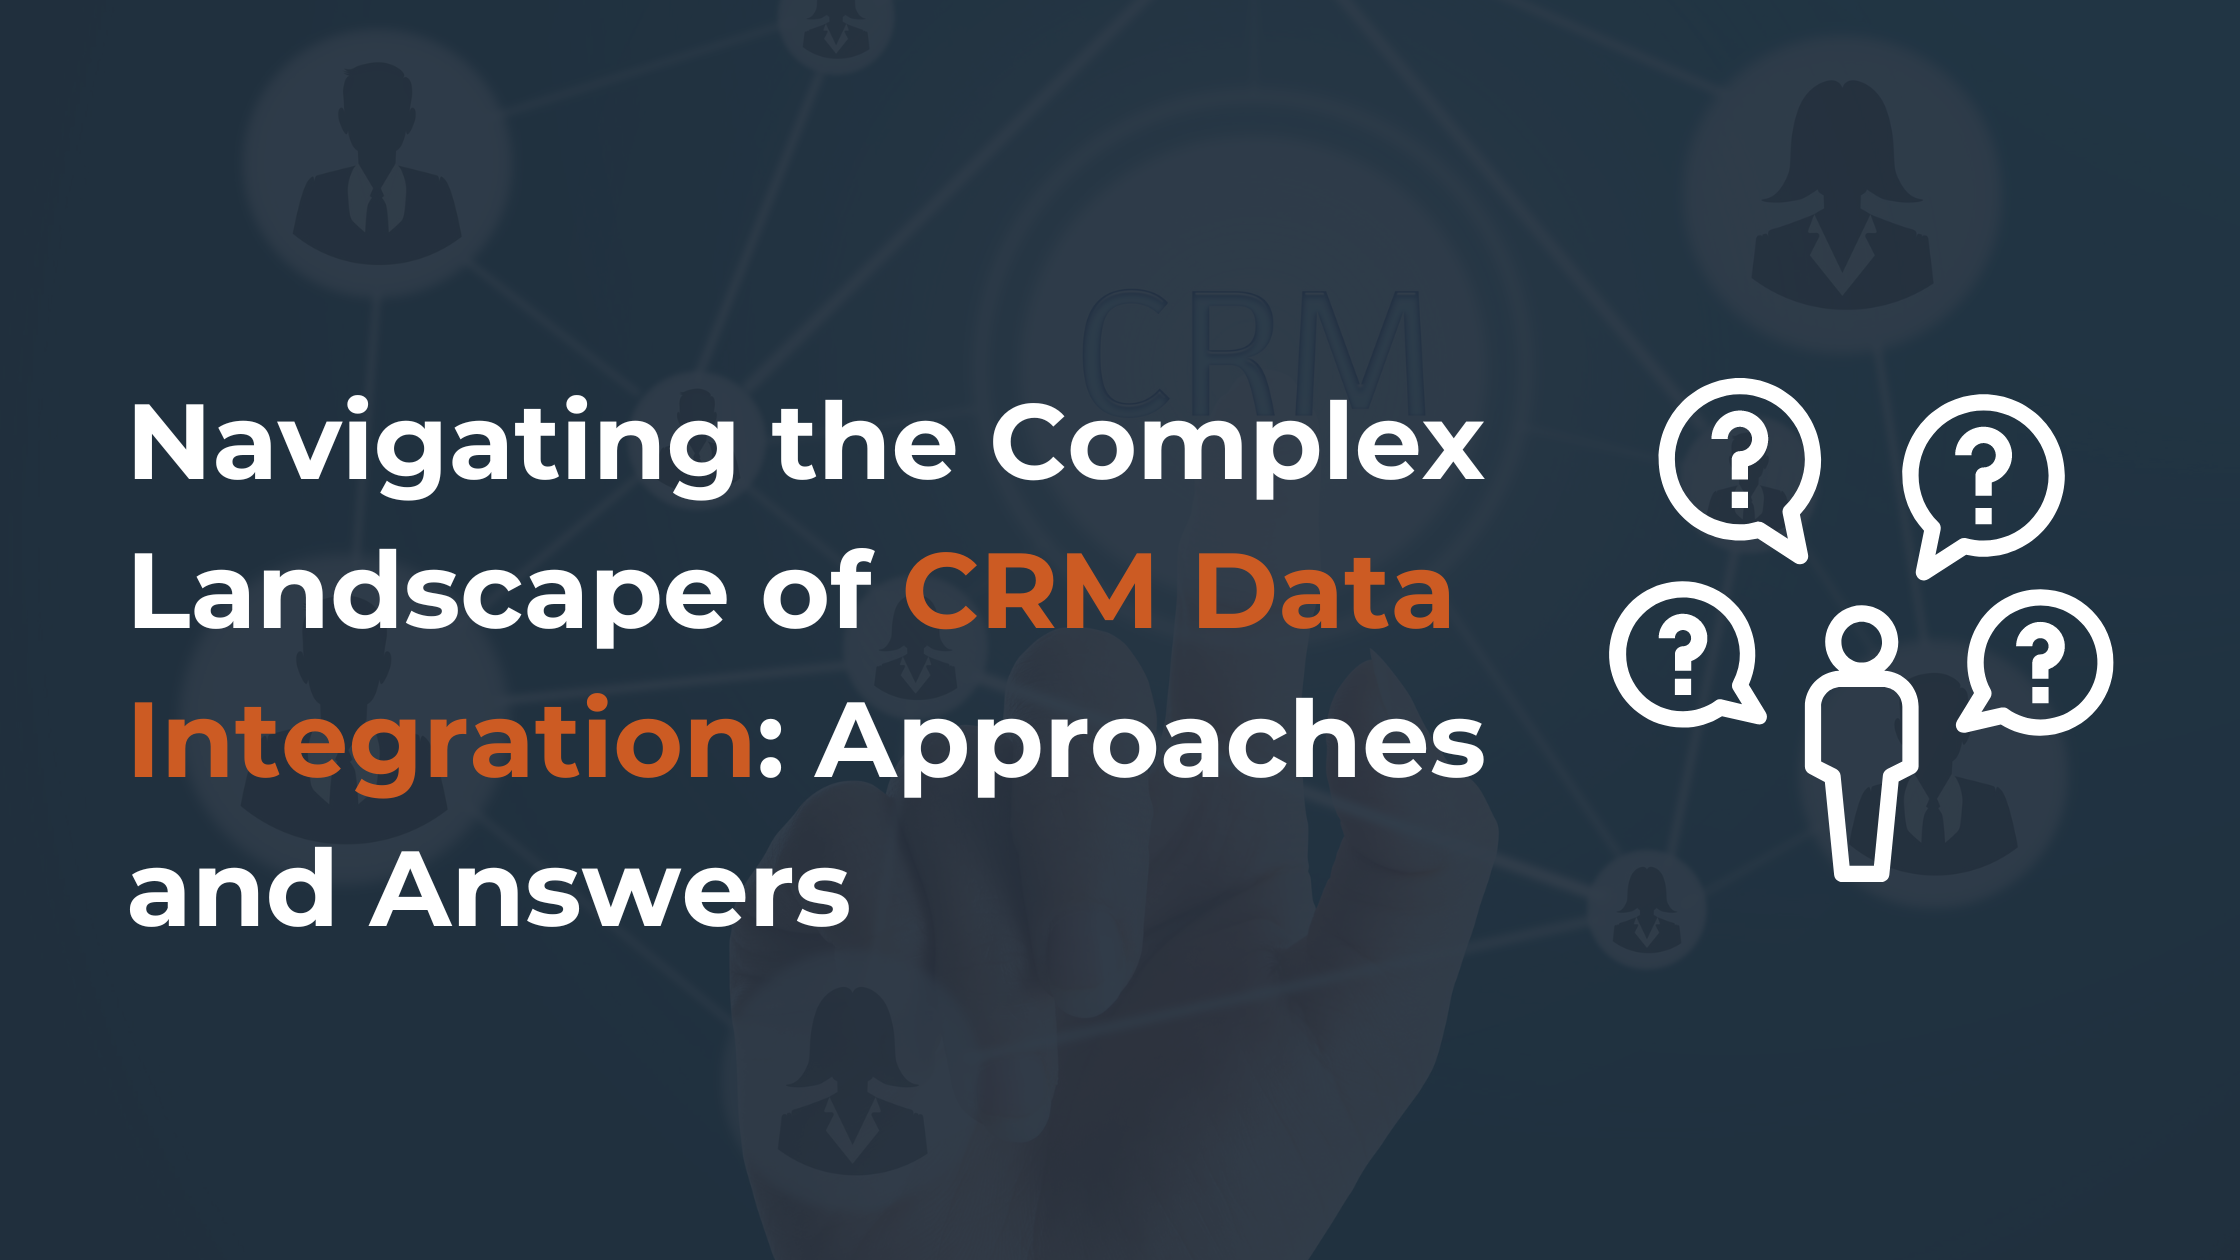 Navigating the Complex Landscape of CRM Data Integration: Approaches and Answers